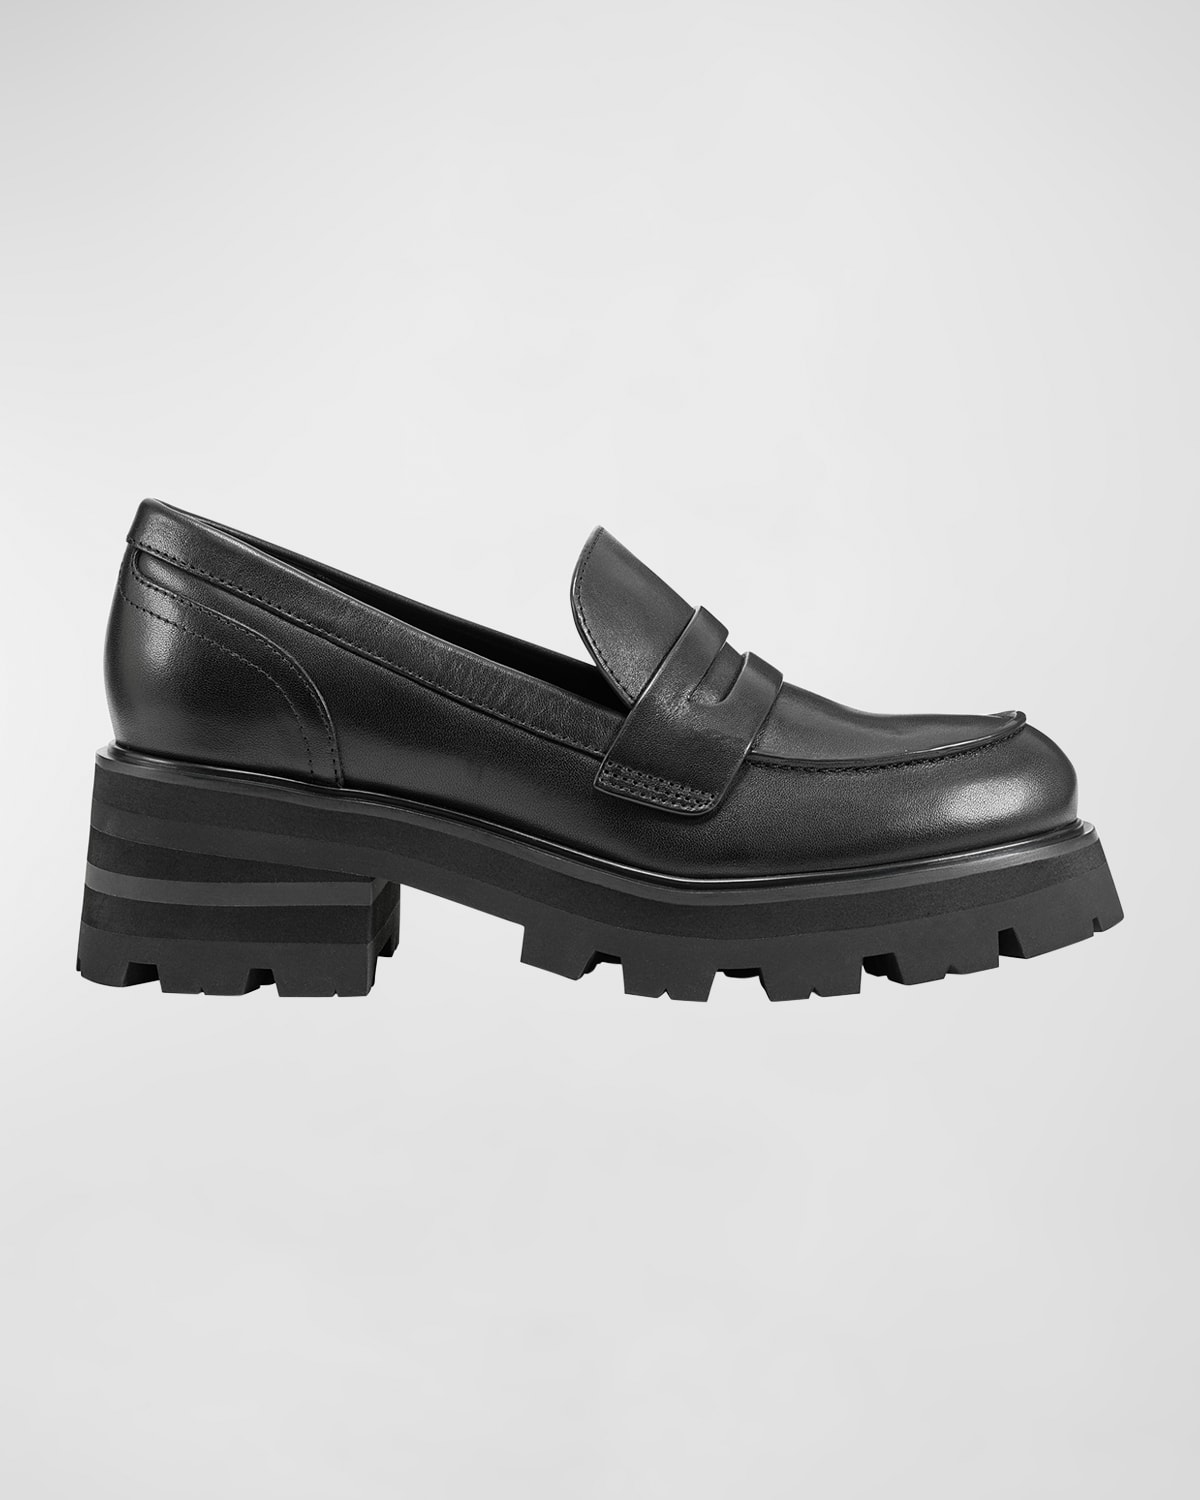 Latika Patent Leather Casual Penny Loafers